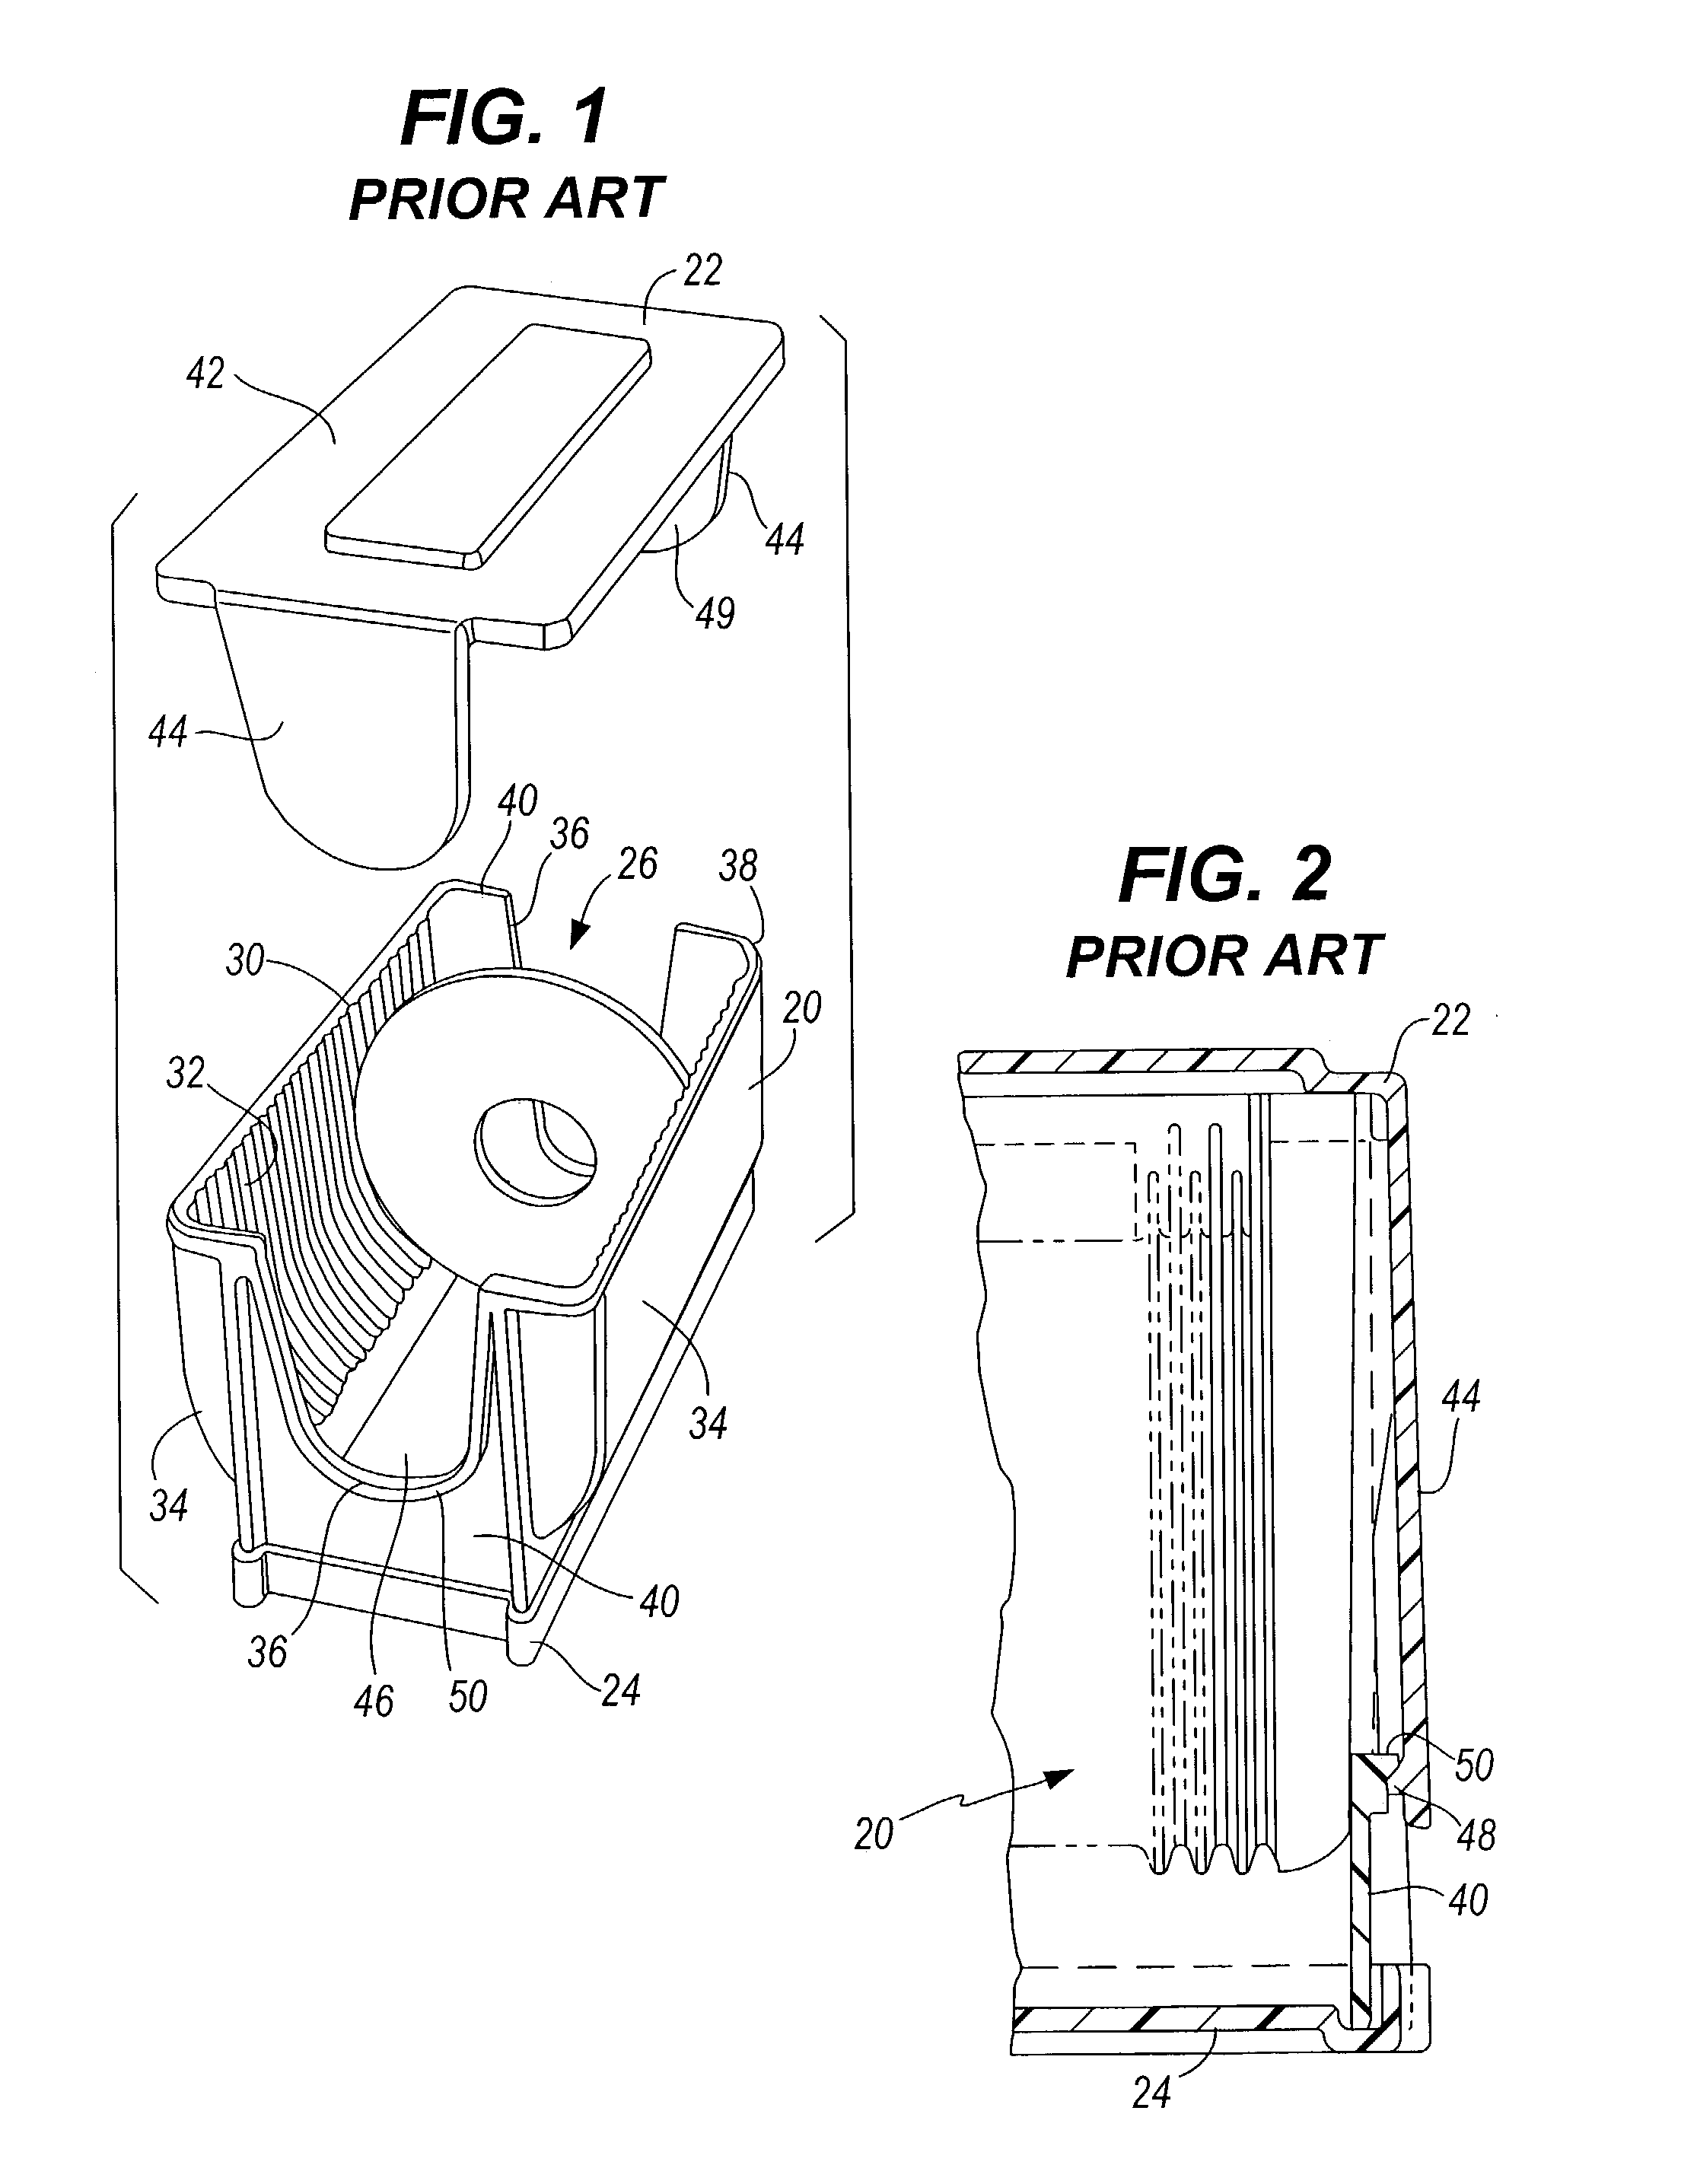 Memory disk shipping container with improved contaminant control